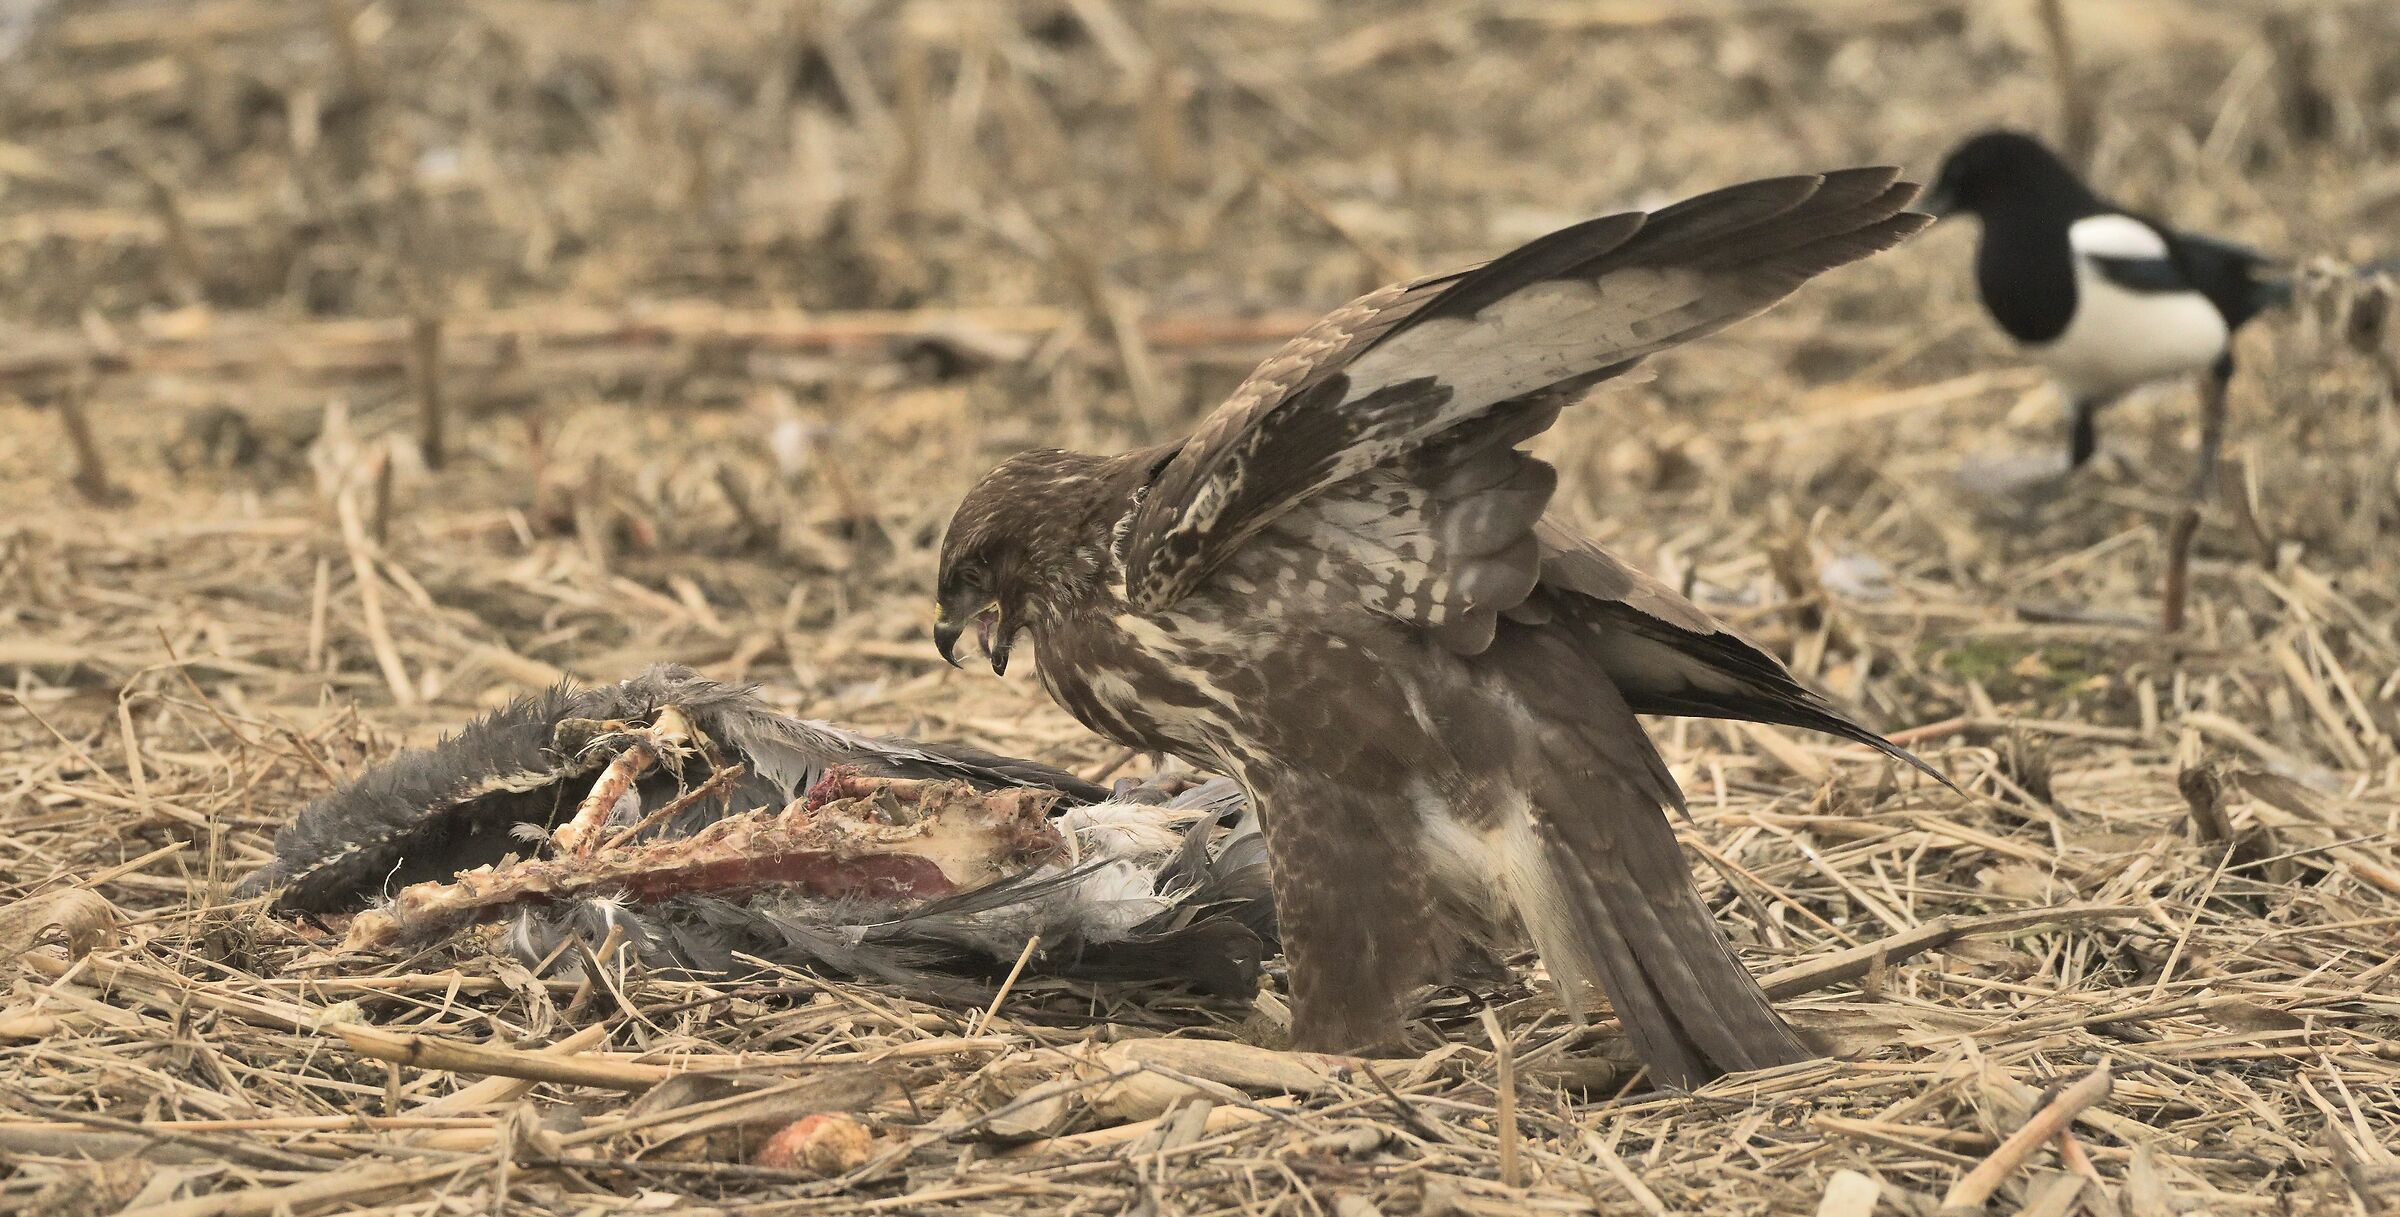 Buzzard struggling with the remnants of a Cinerino heron...